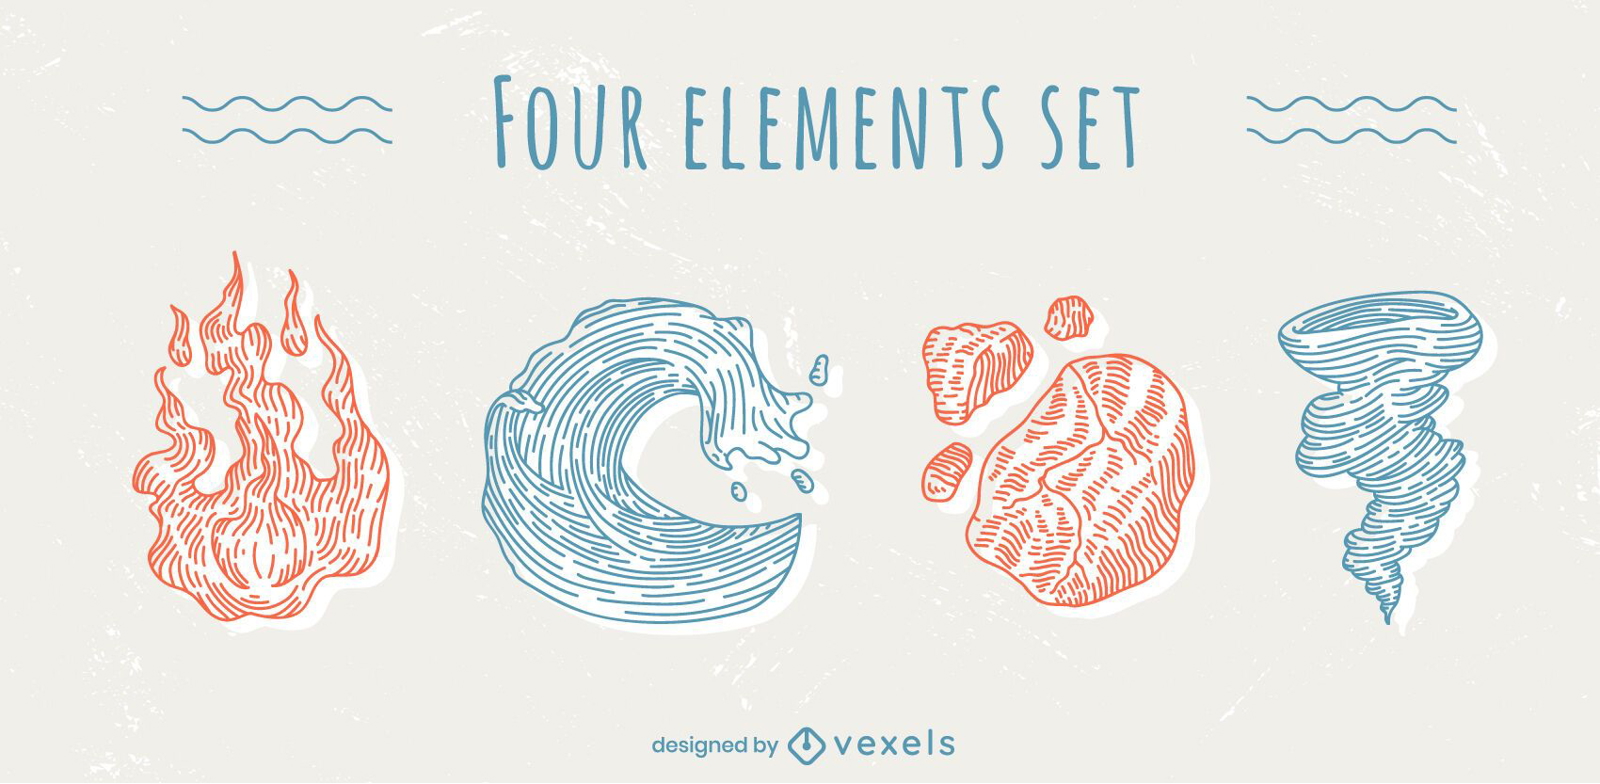 Four classical elements pack